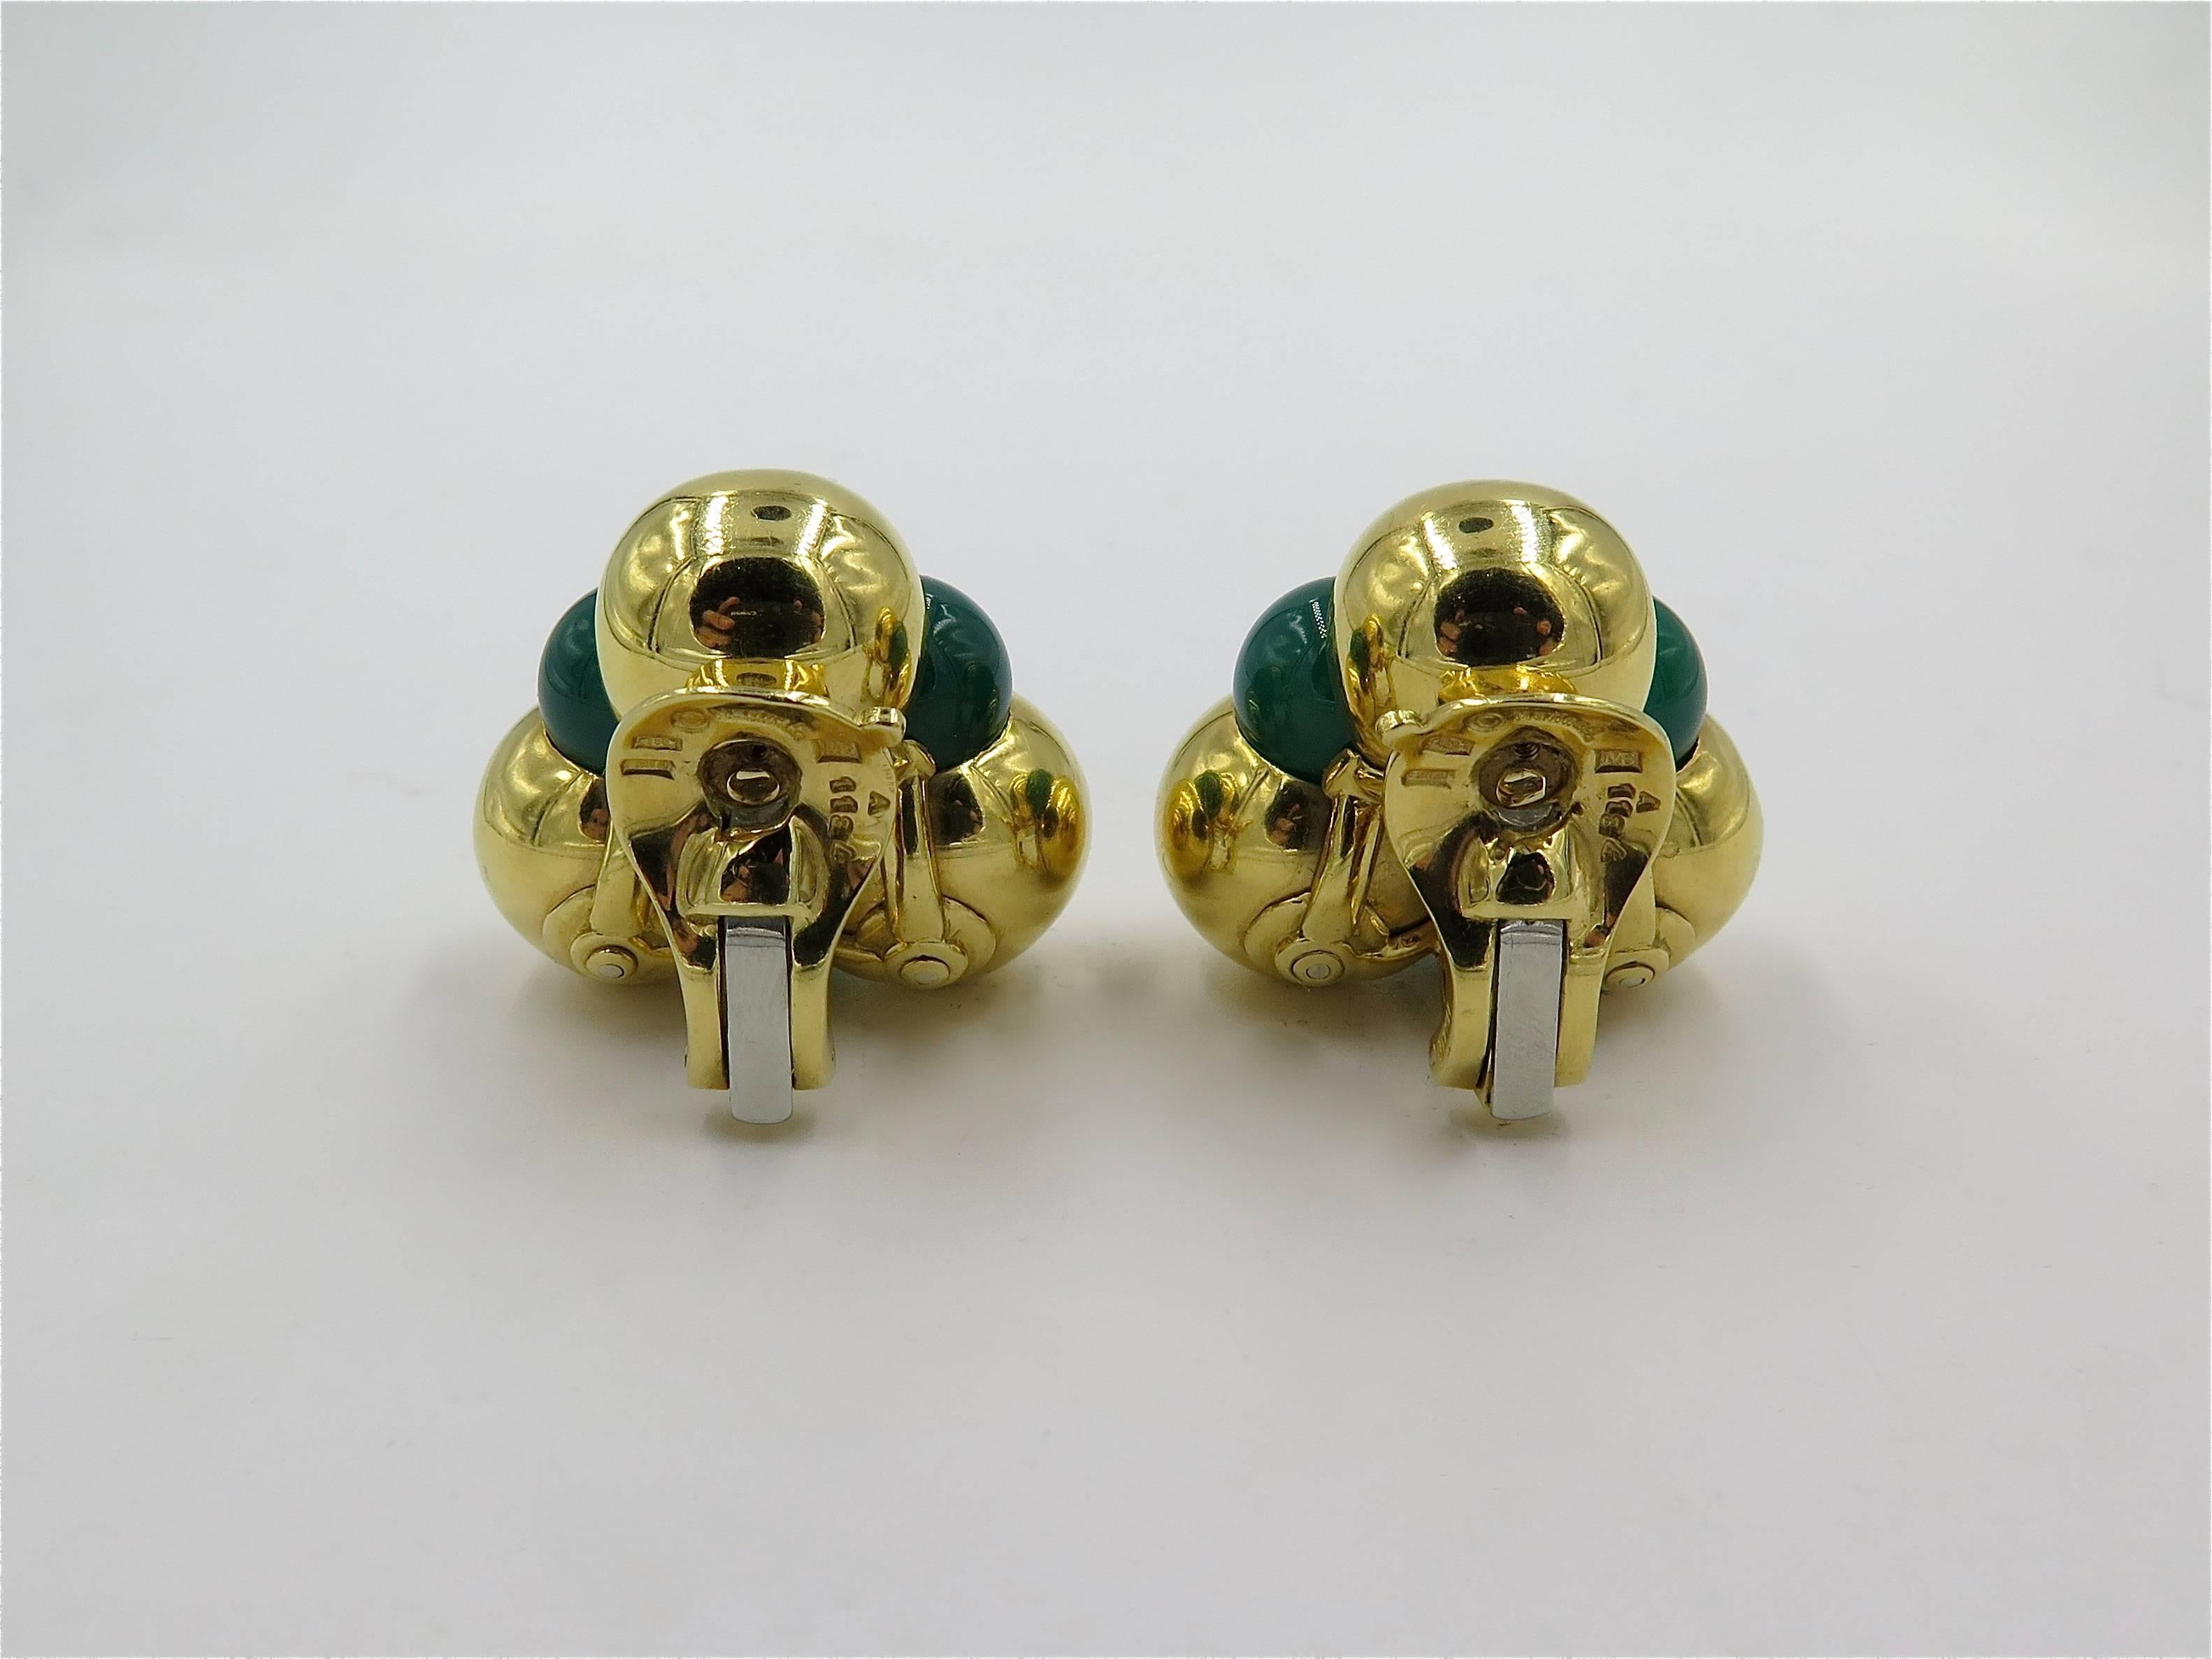 A pair of 18 karat yellow gold and chrysoprase earrings. Marina B. From the Sfera collection. Of triangular outline, set with three polished yellow gold beads, spaced by chrysoprase beads. Length is approximately 1 inch. Numbered 1134. Gross weight